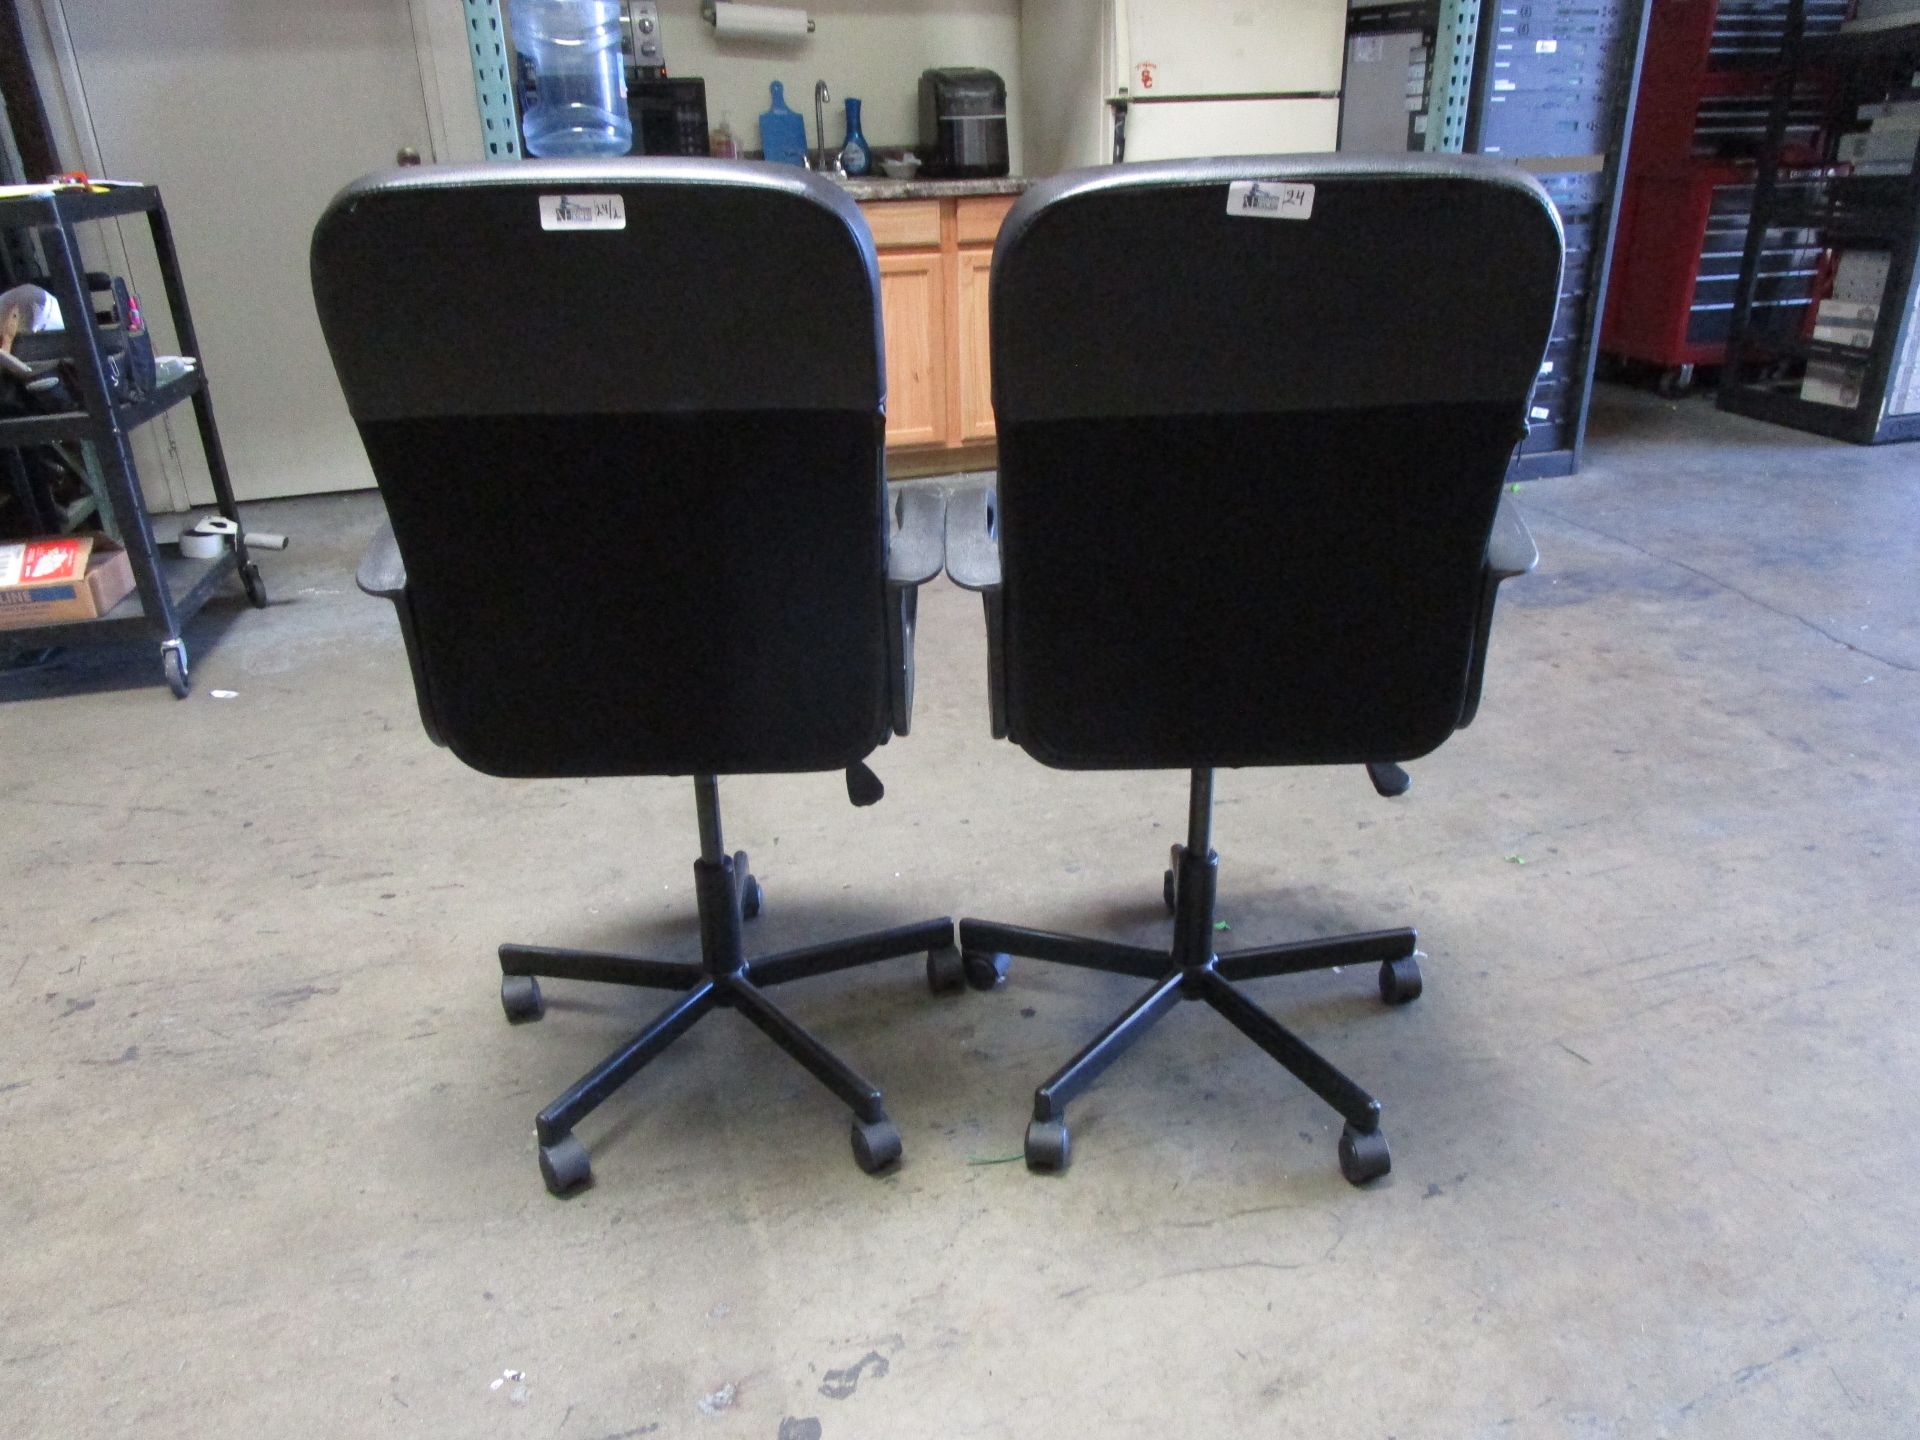 LOT OF 2 IKEA RENBERGET ROLLING DESK CHAIRS - Image 3 of 4